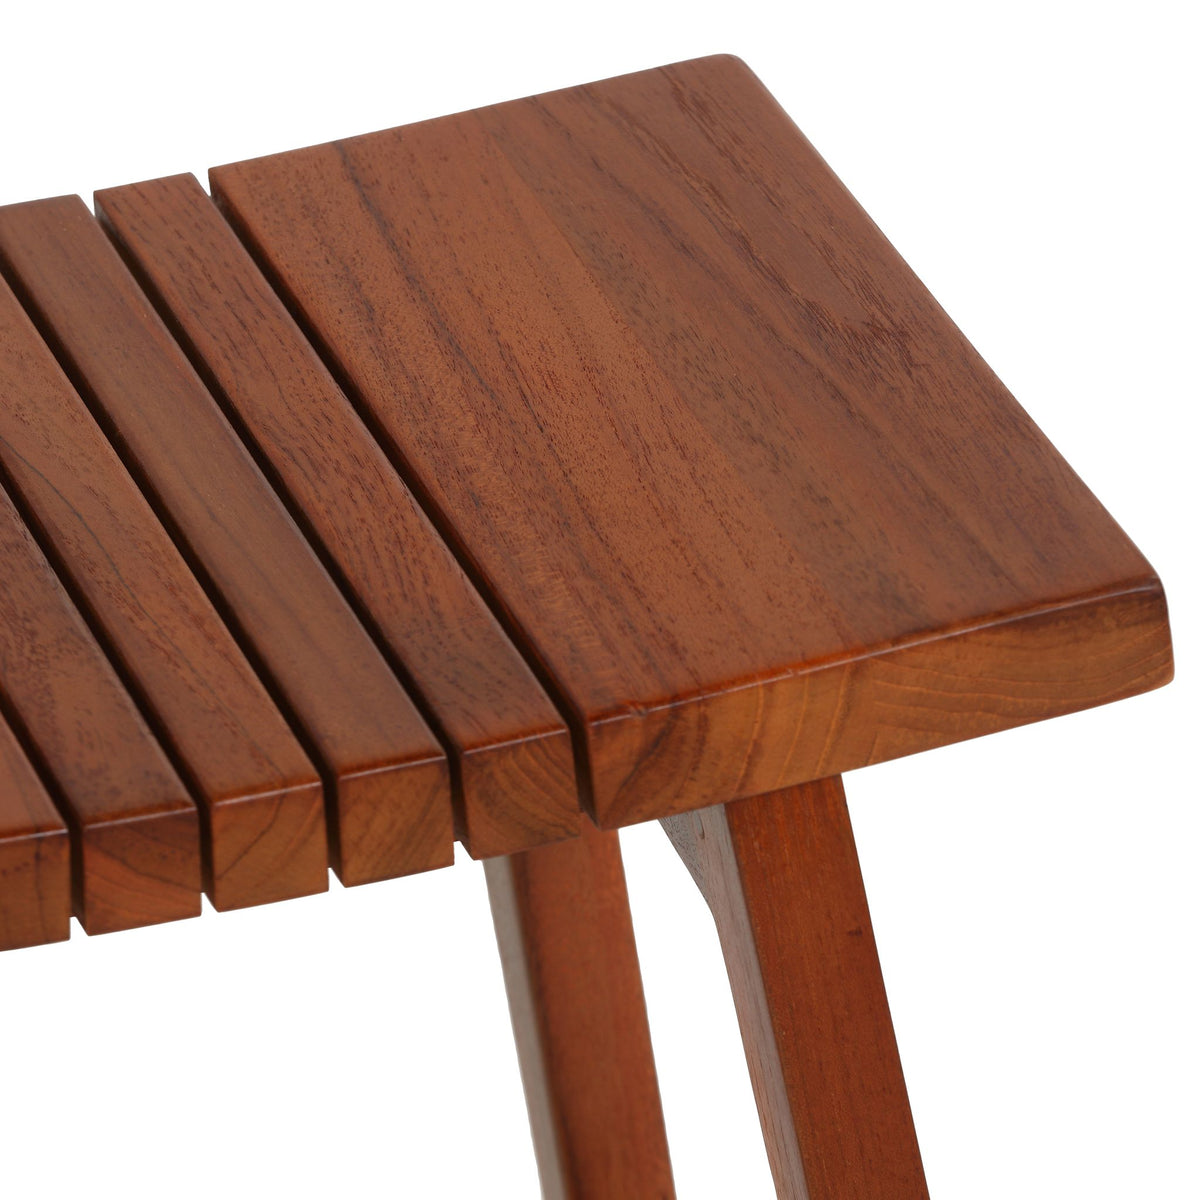 Bare Decor Hanoi Shower and Spa Stool in Solid Teak Wood, 19x14x17h